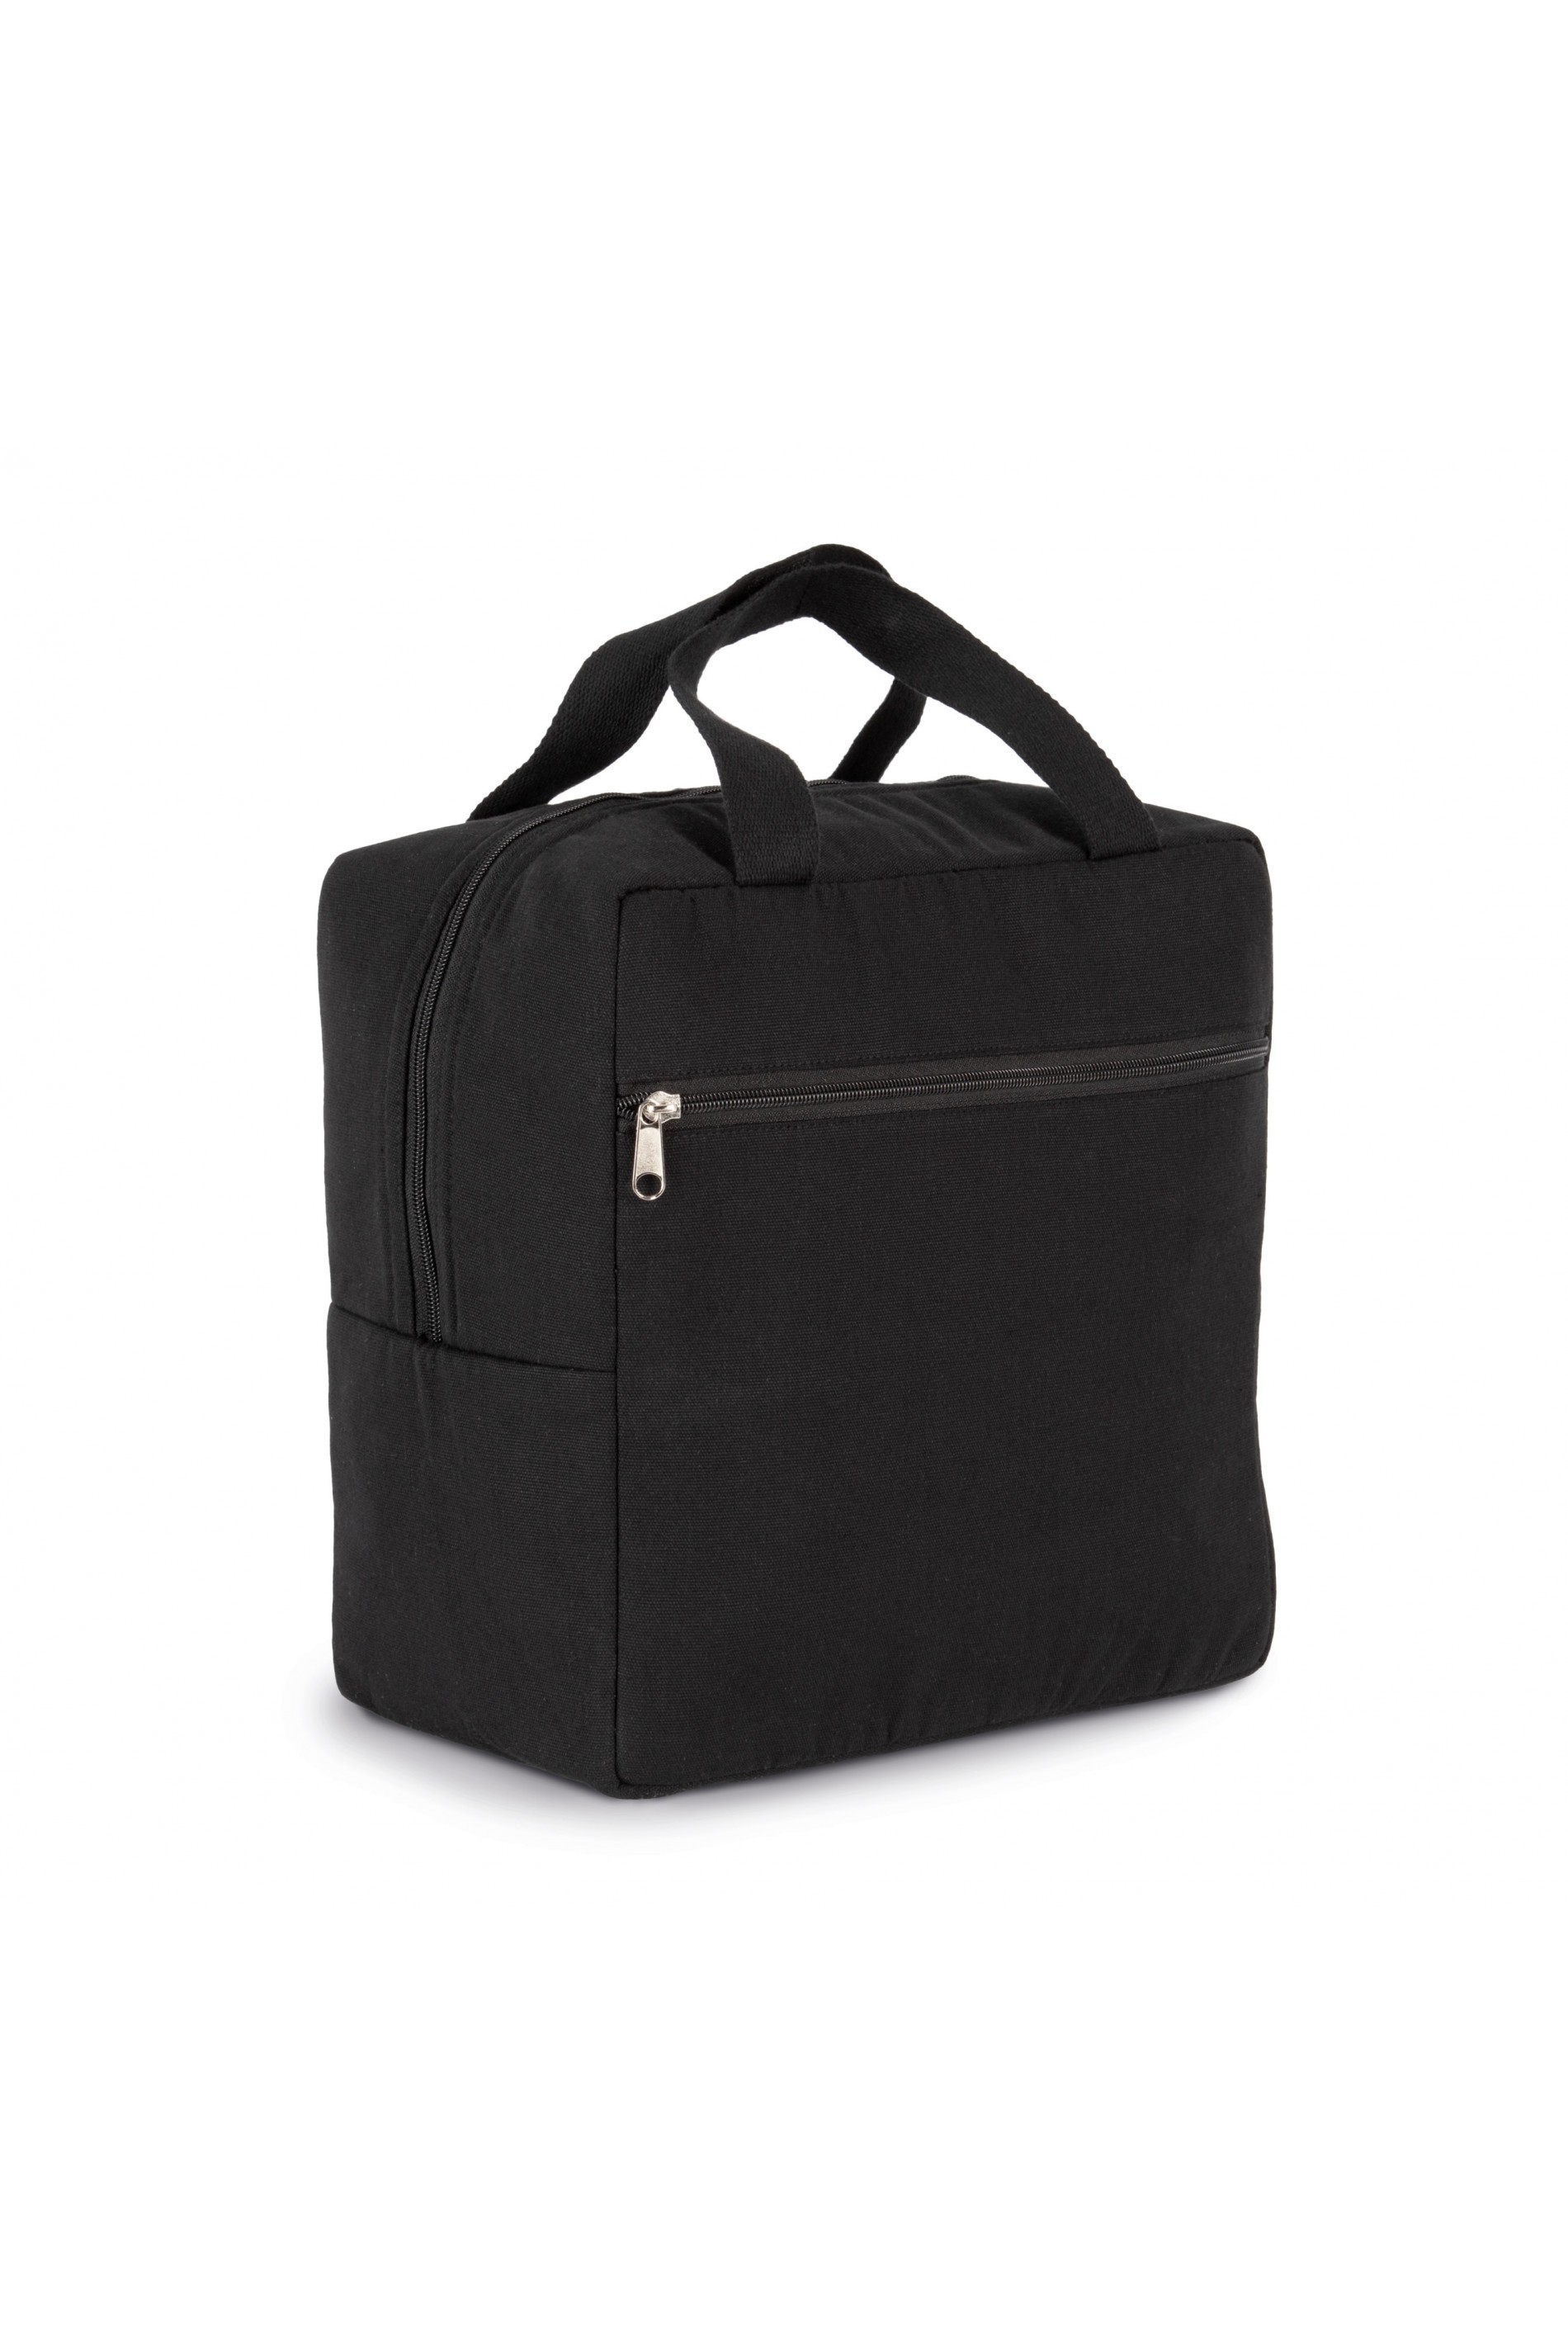 Sac Publicitaire Isotherme K-Loop